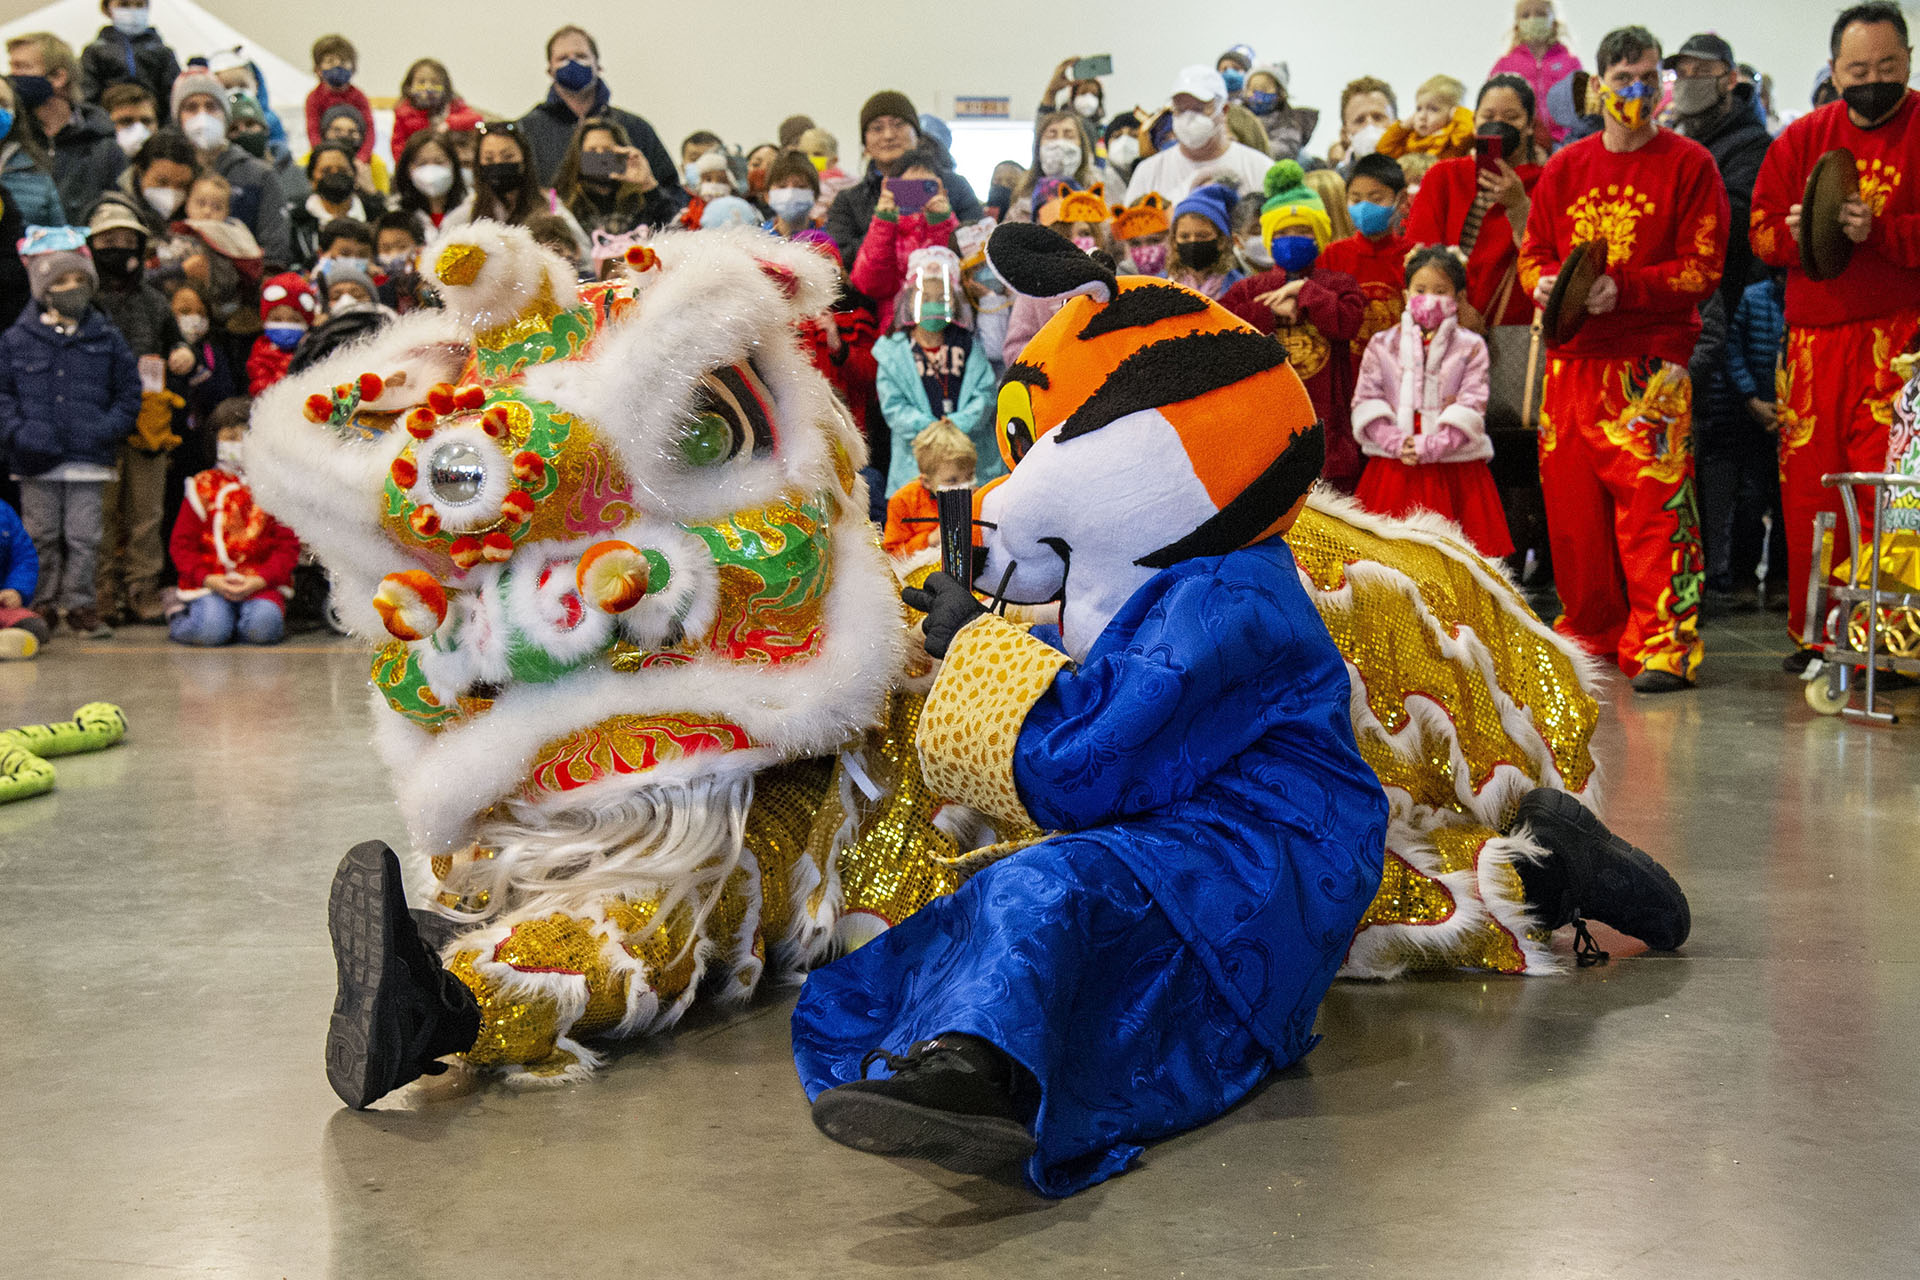 Chein Hong School of Kung Fu performs a Lion Dance during the Lunar New Year Celebration at Legacy Park in Decatur on Saturday, Jan. 29. 2022. Photo by Dean Hesse.